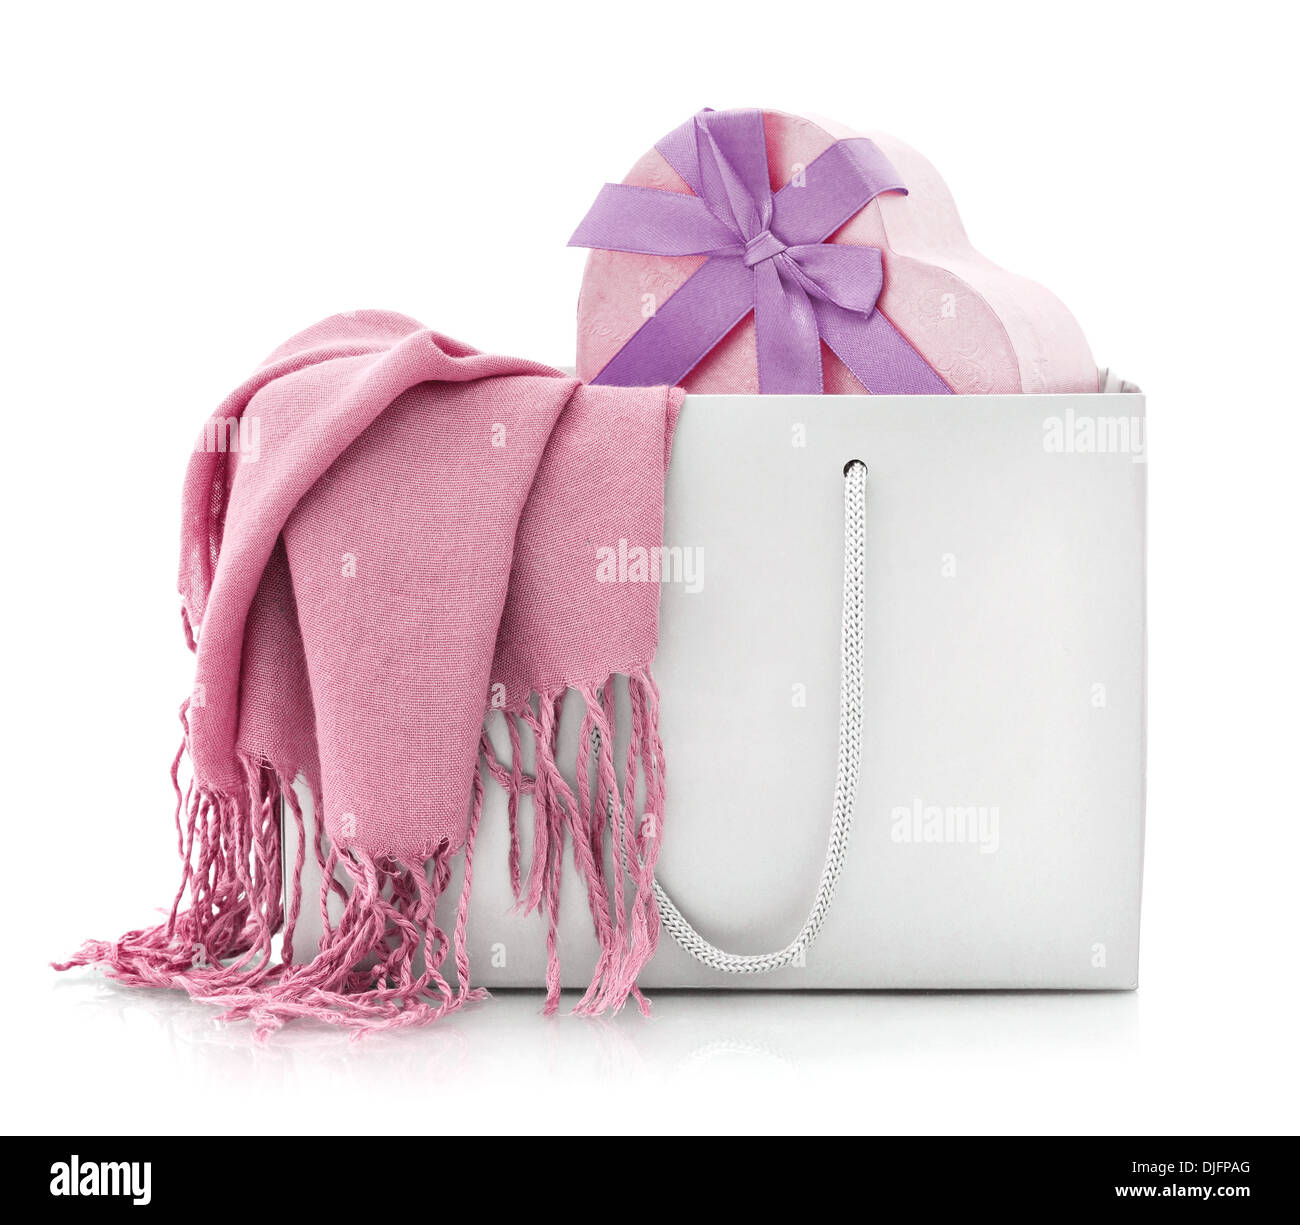 Pink scarf in shopping bag with gift box isolated on a white background Stock Photo